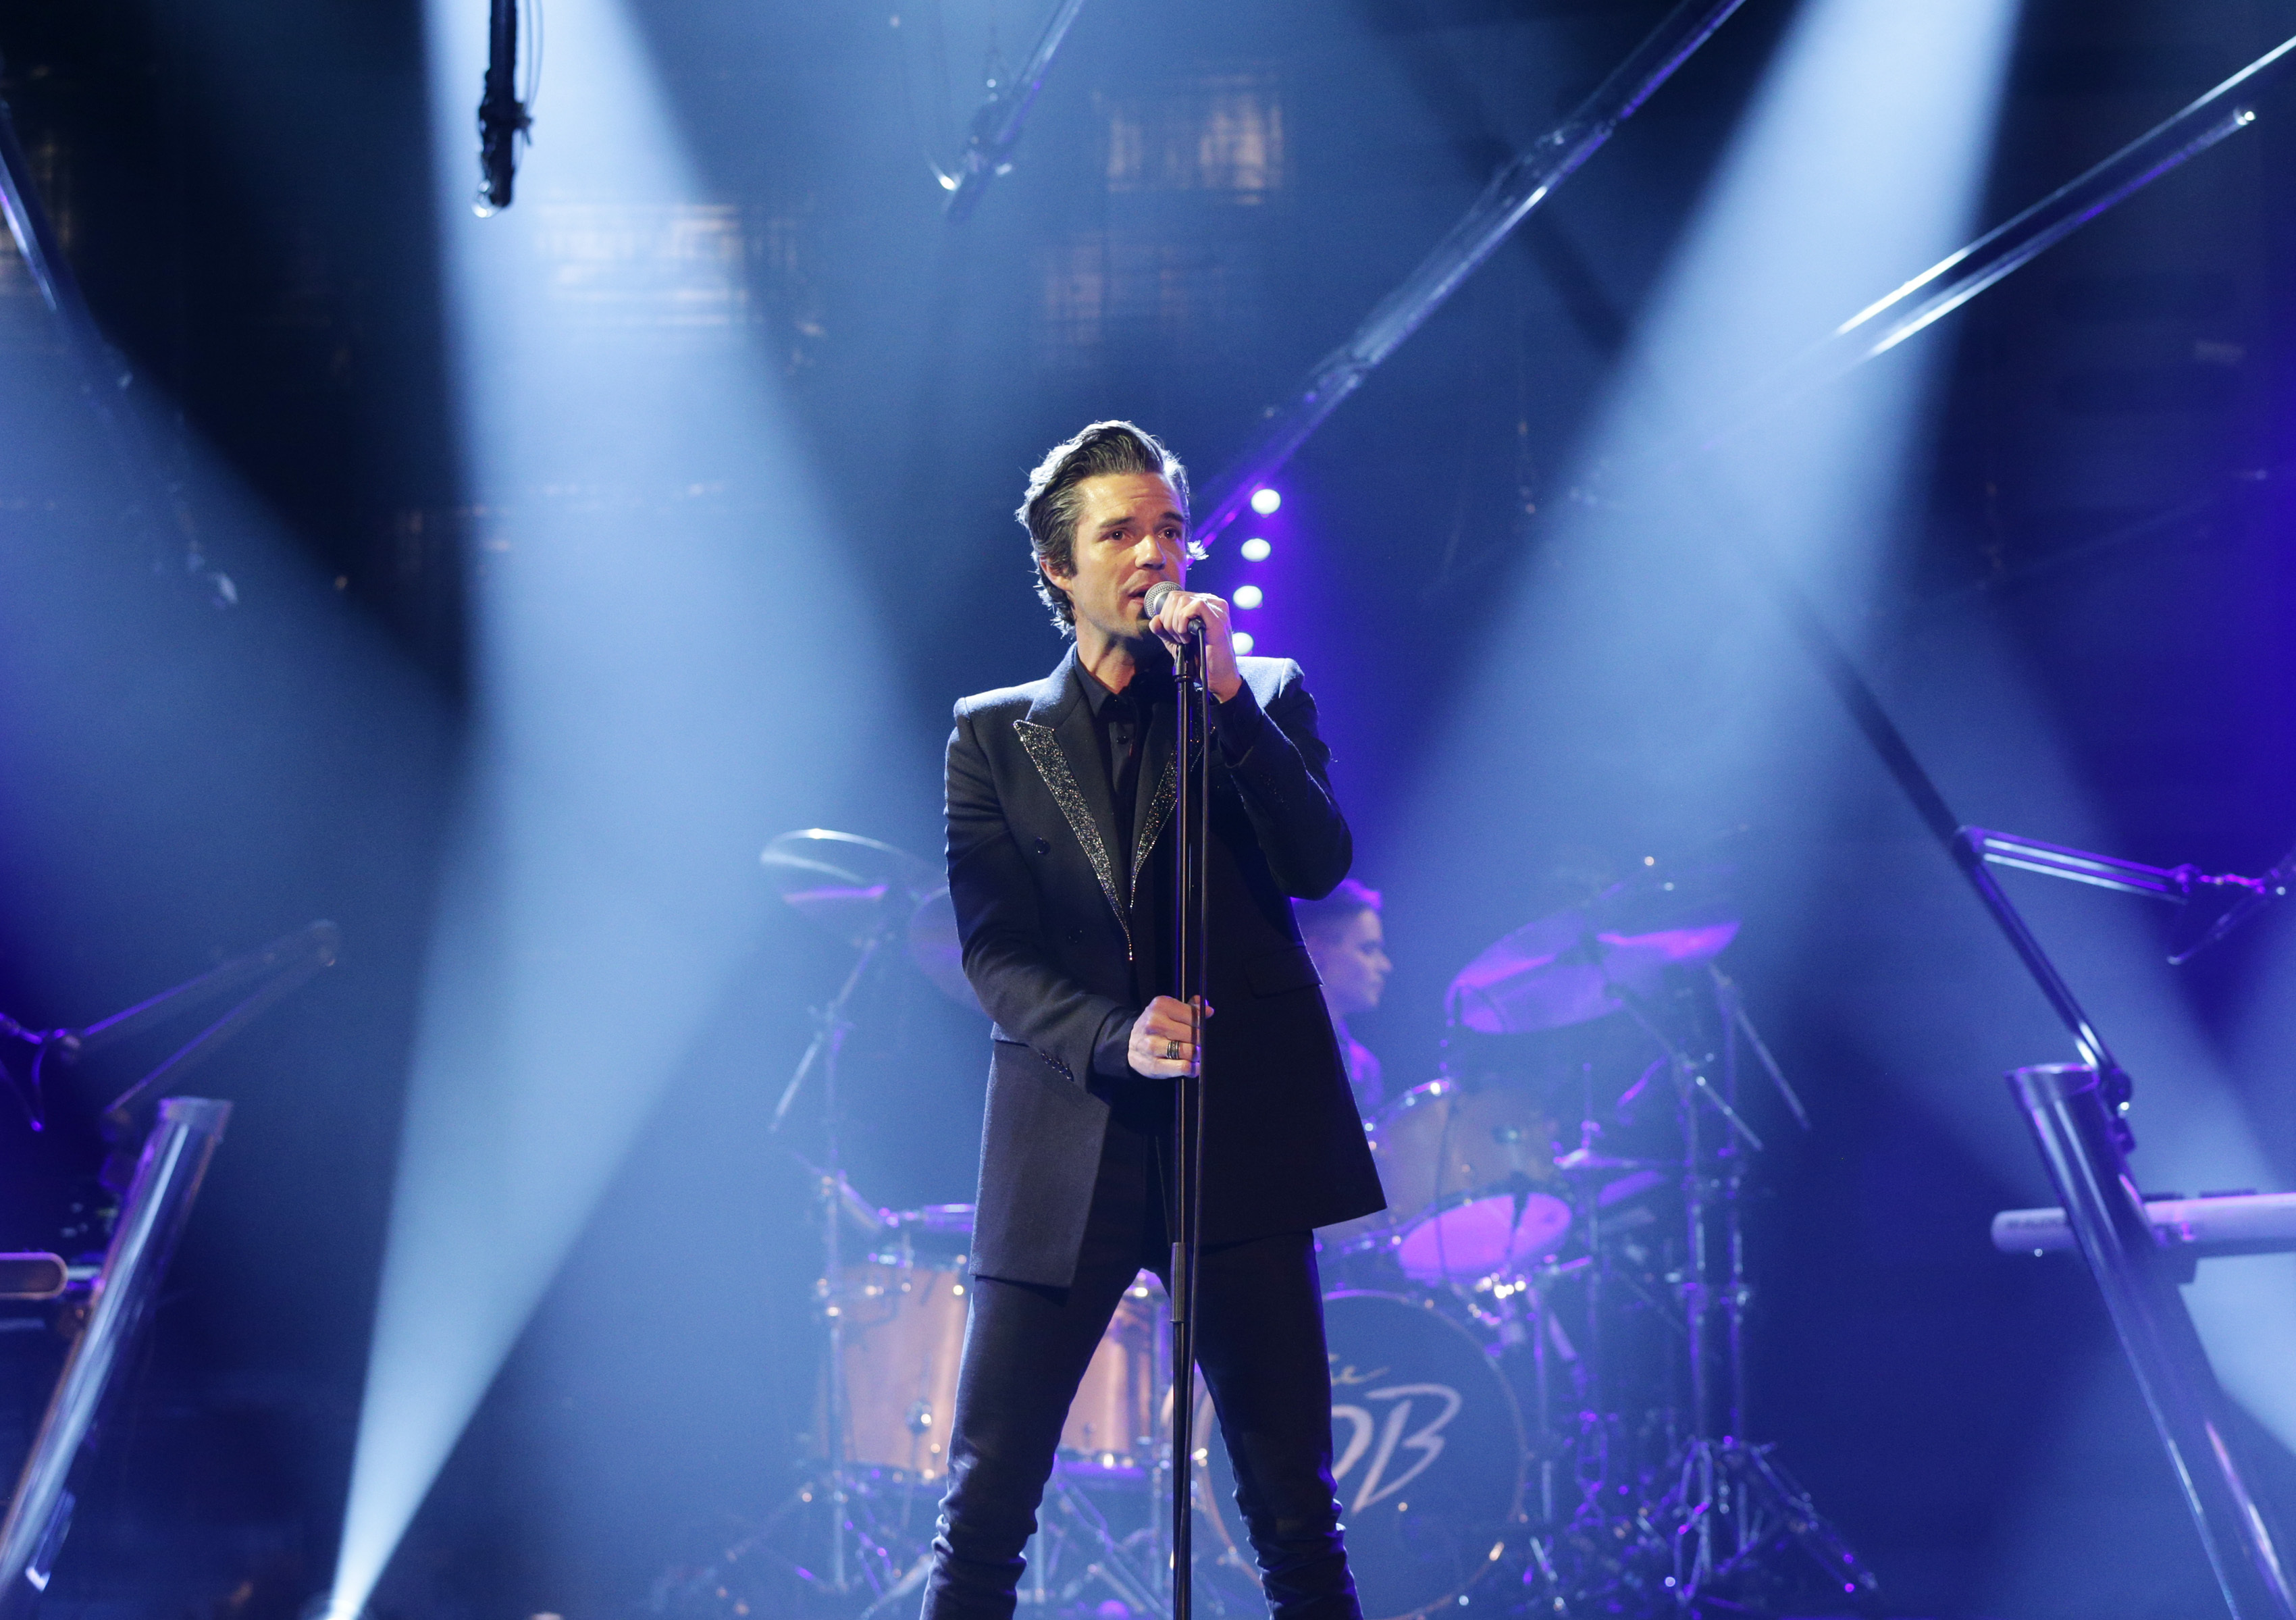 Brandon Flowers performing during filming of the Graham Norton Show